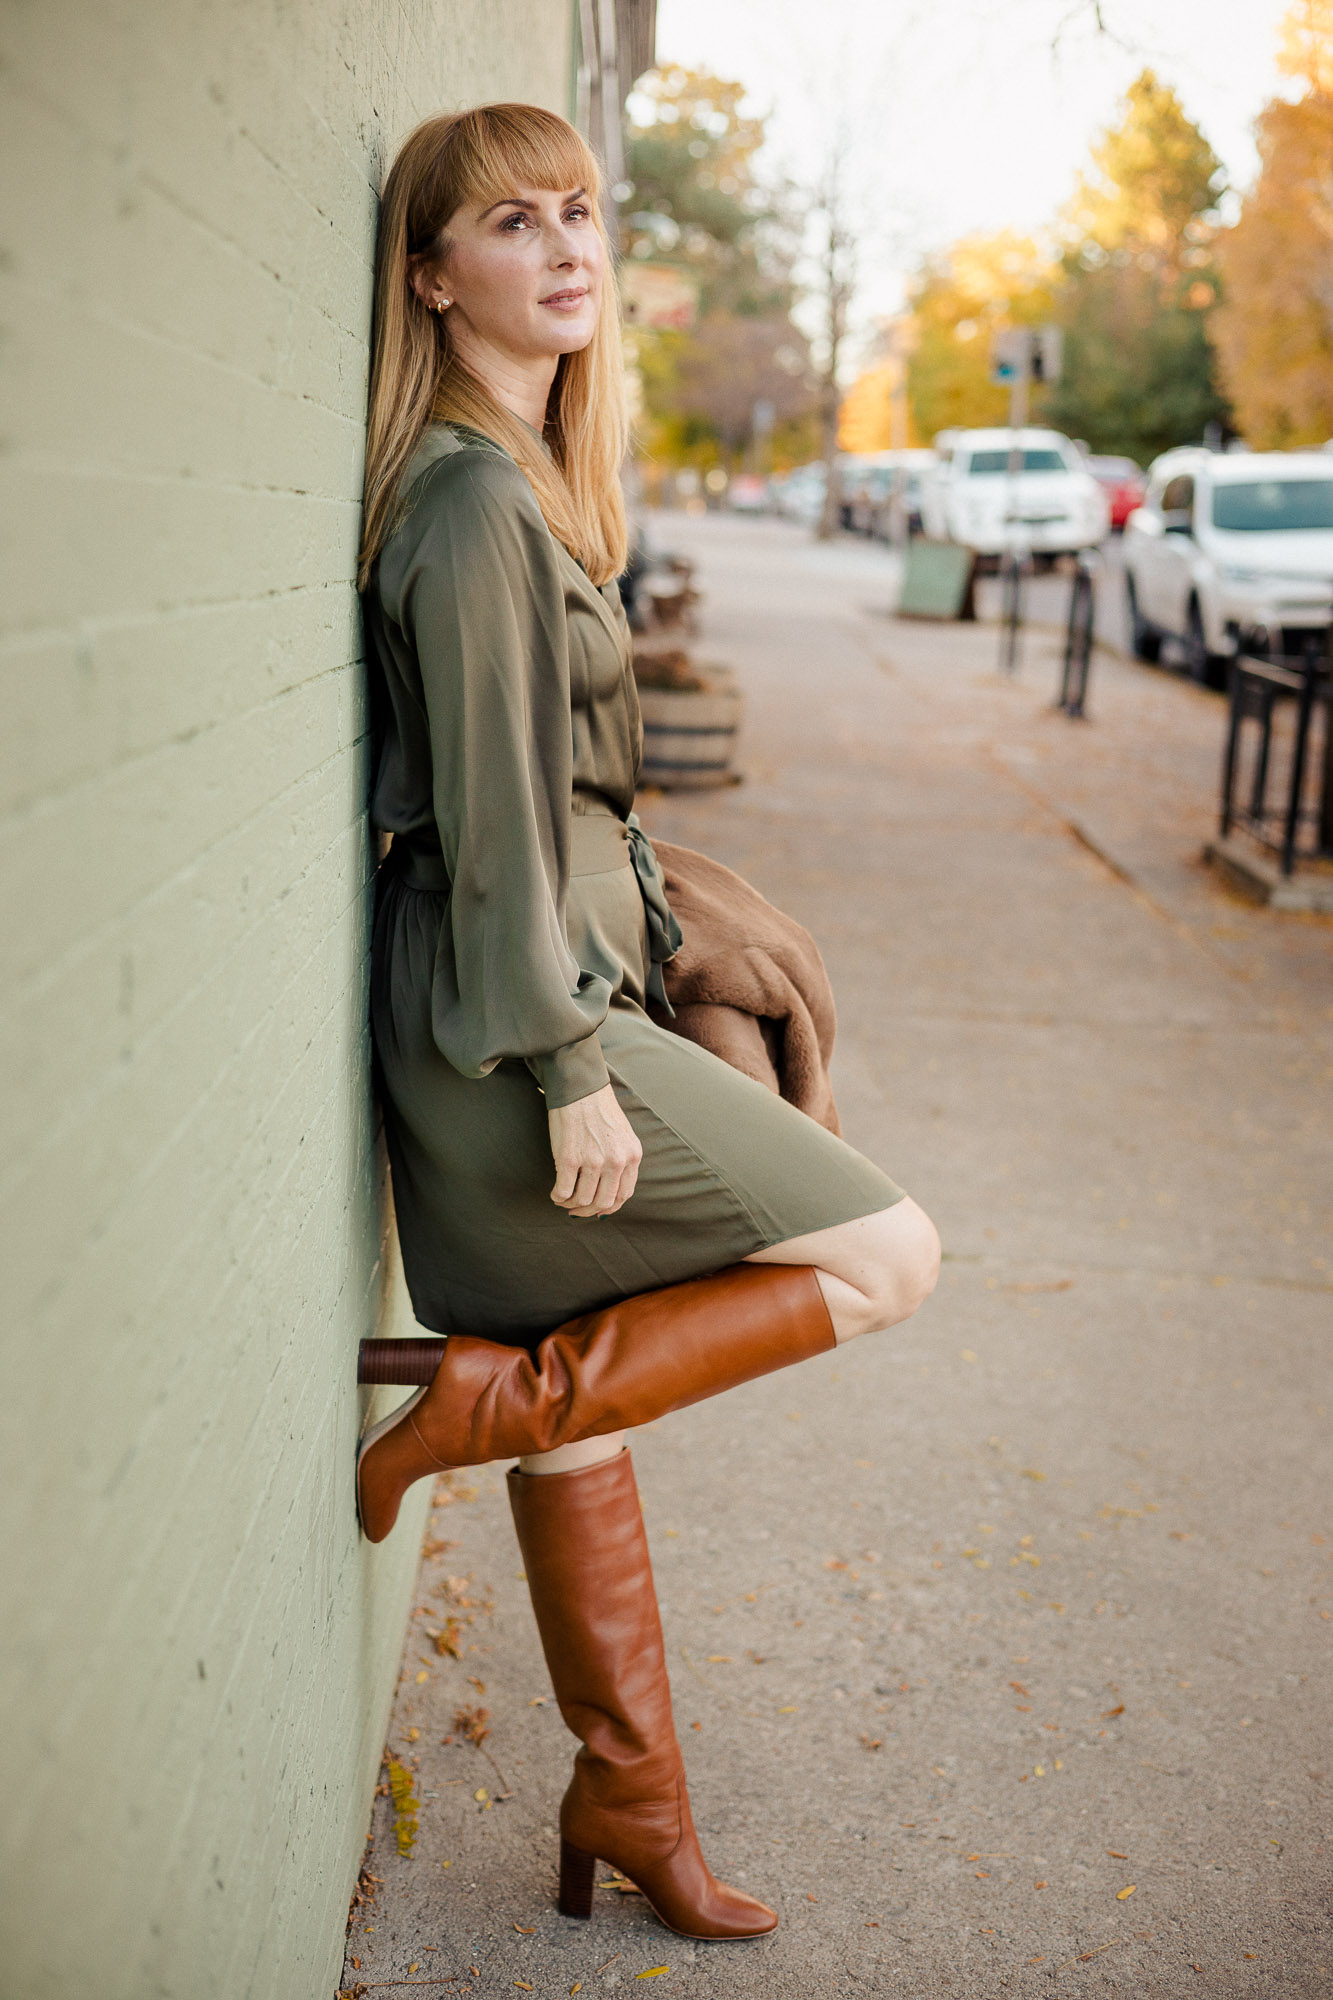 Wearing the Ramy Brook Ayla dress in olive with Loeffler Randall Goldy boots in cognac.